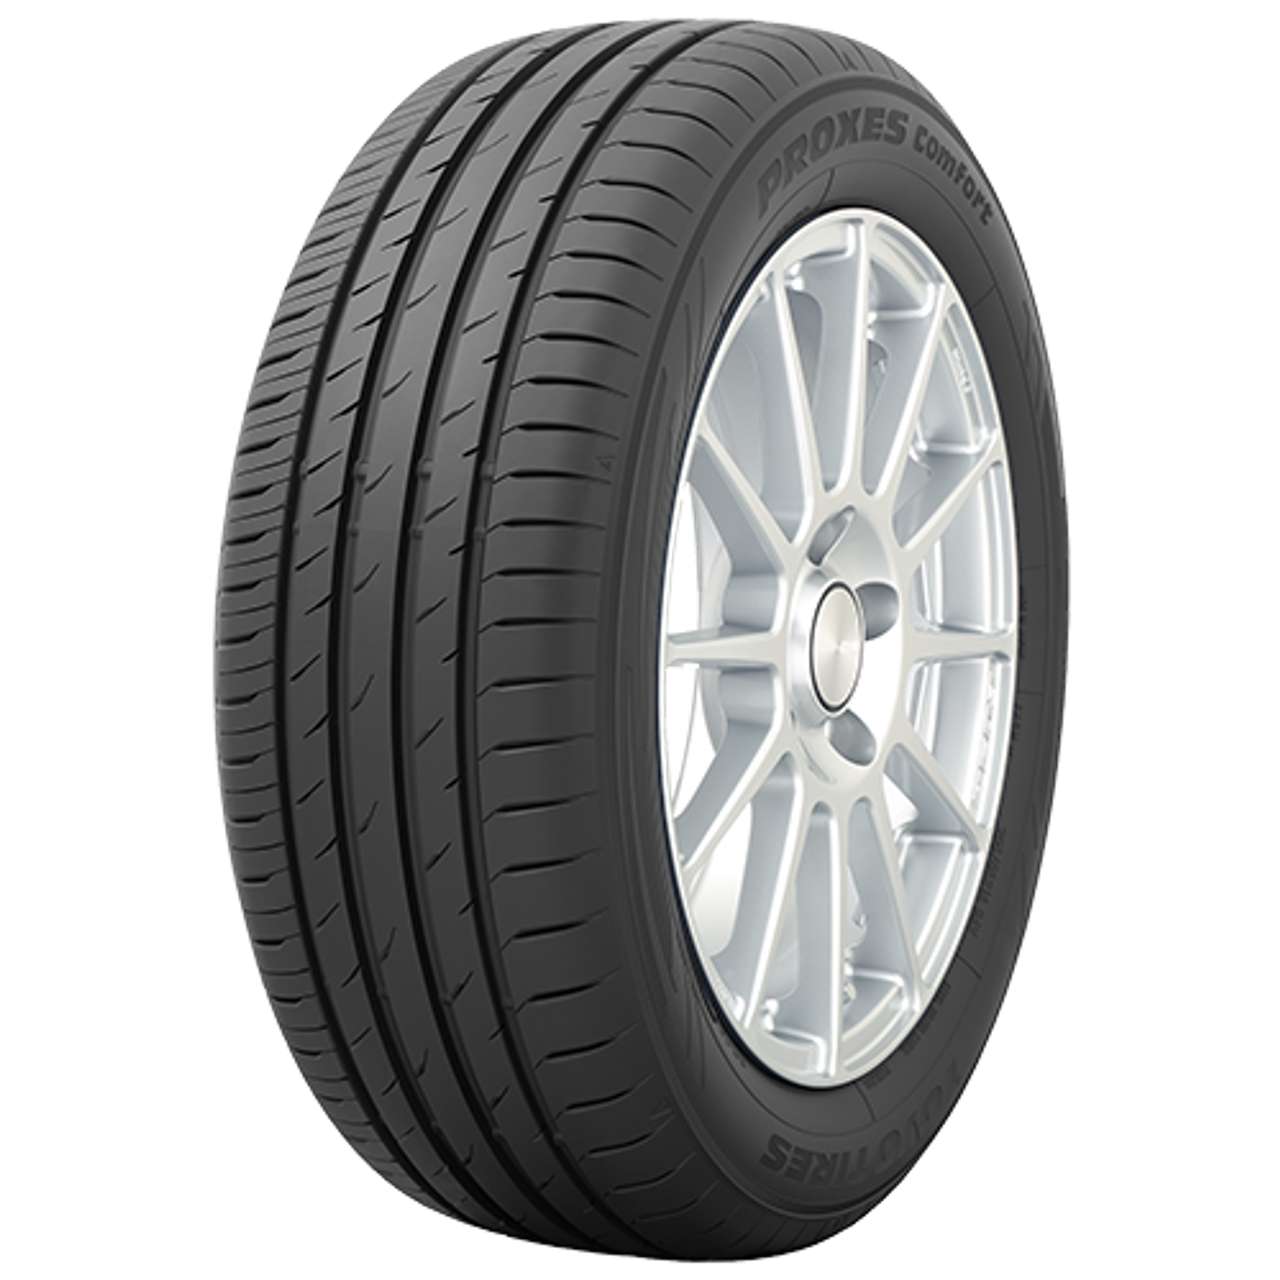 TOYO PROXES COMFORT 205/55R16 94V BSW